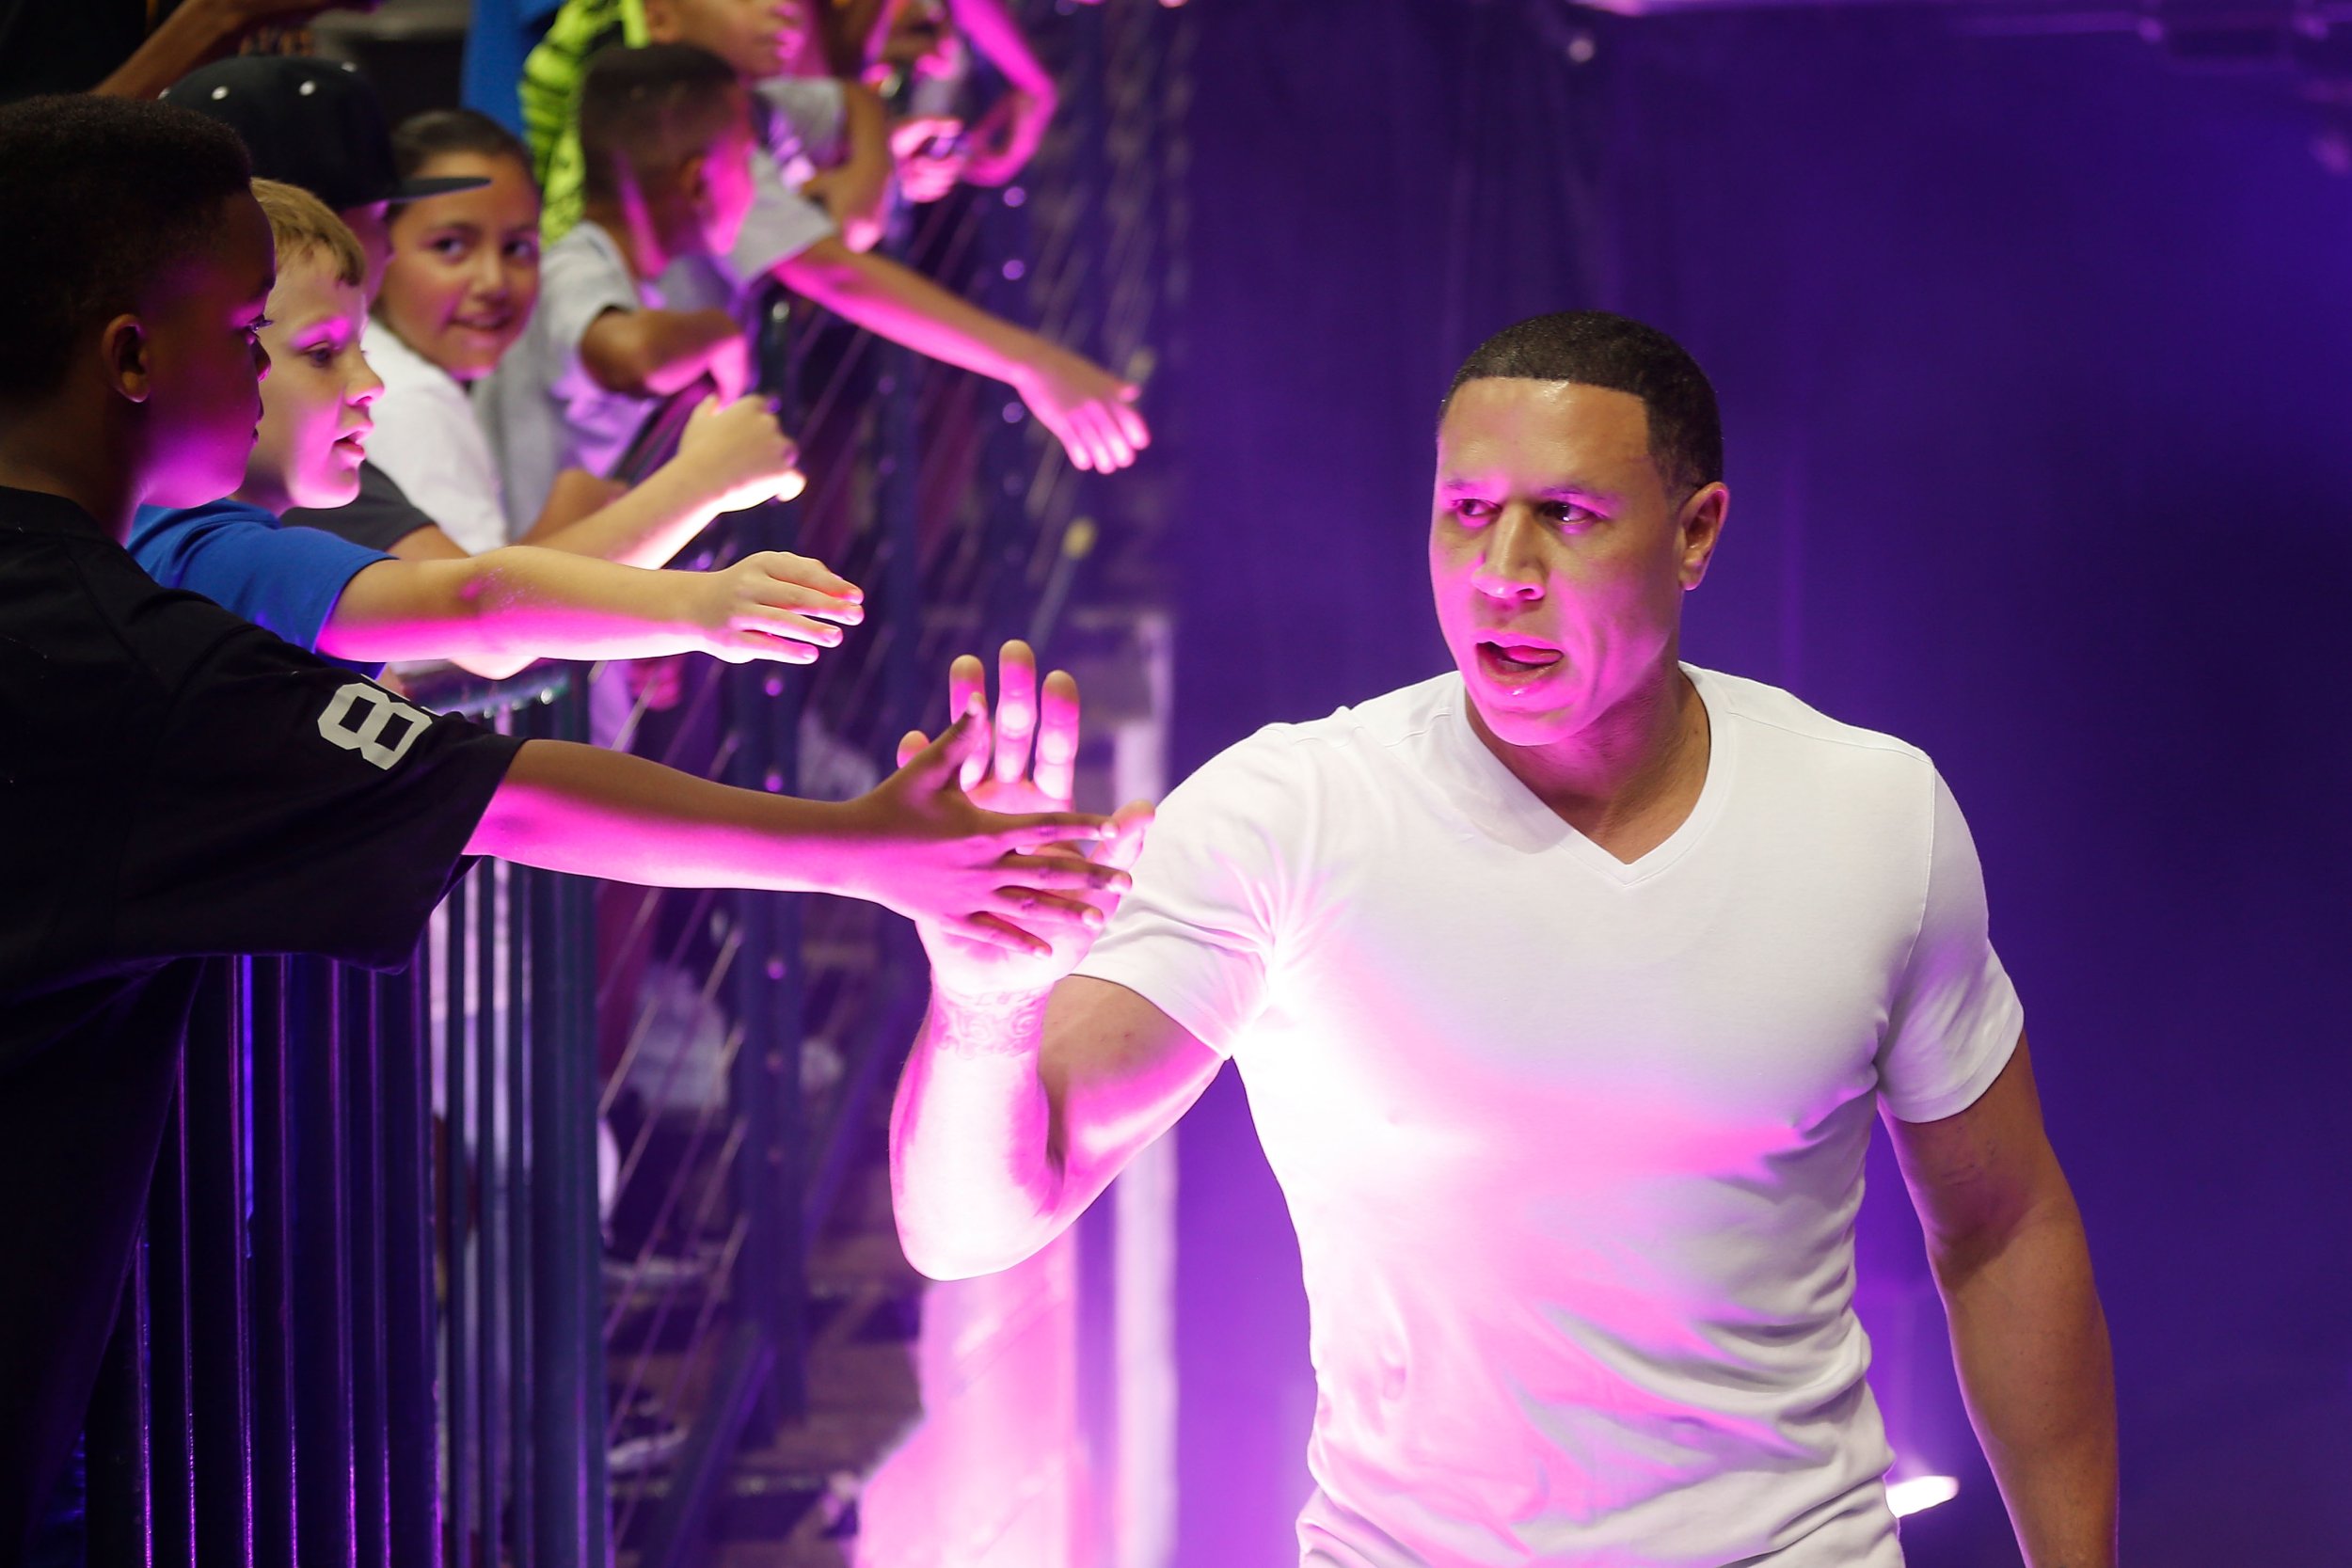 Mike Bibby moves on from coaching for now, leads Ghost Ballers